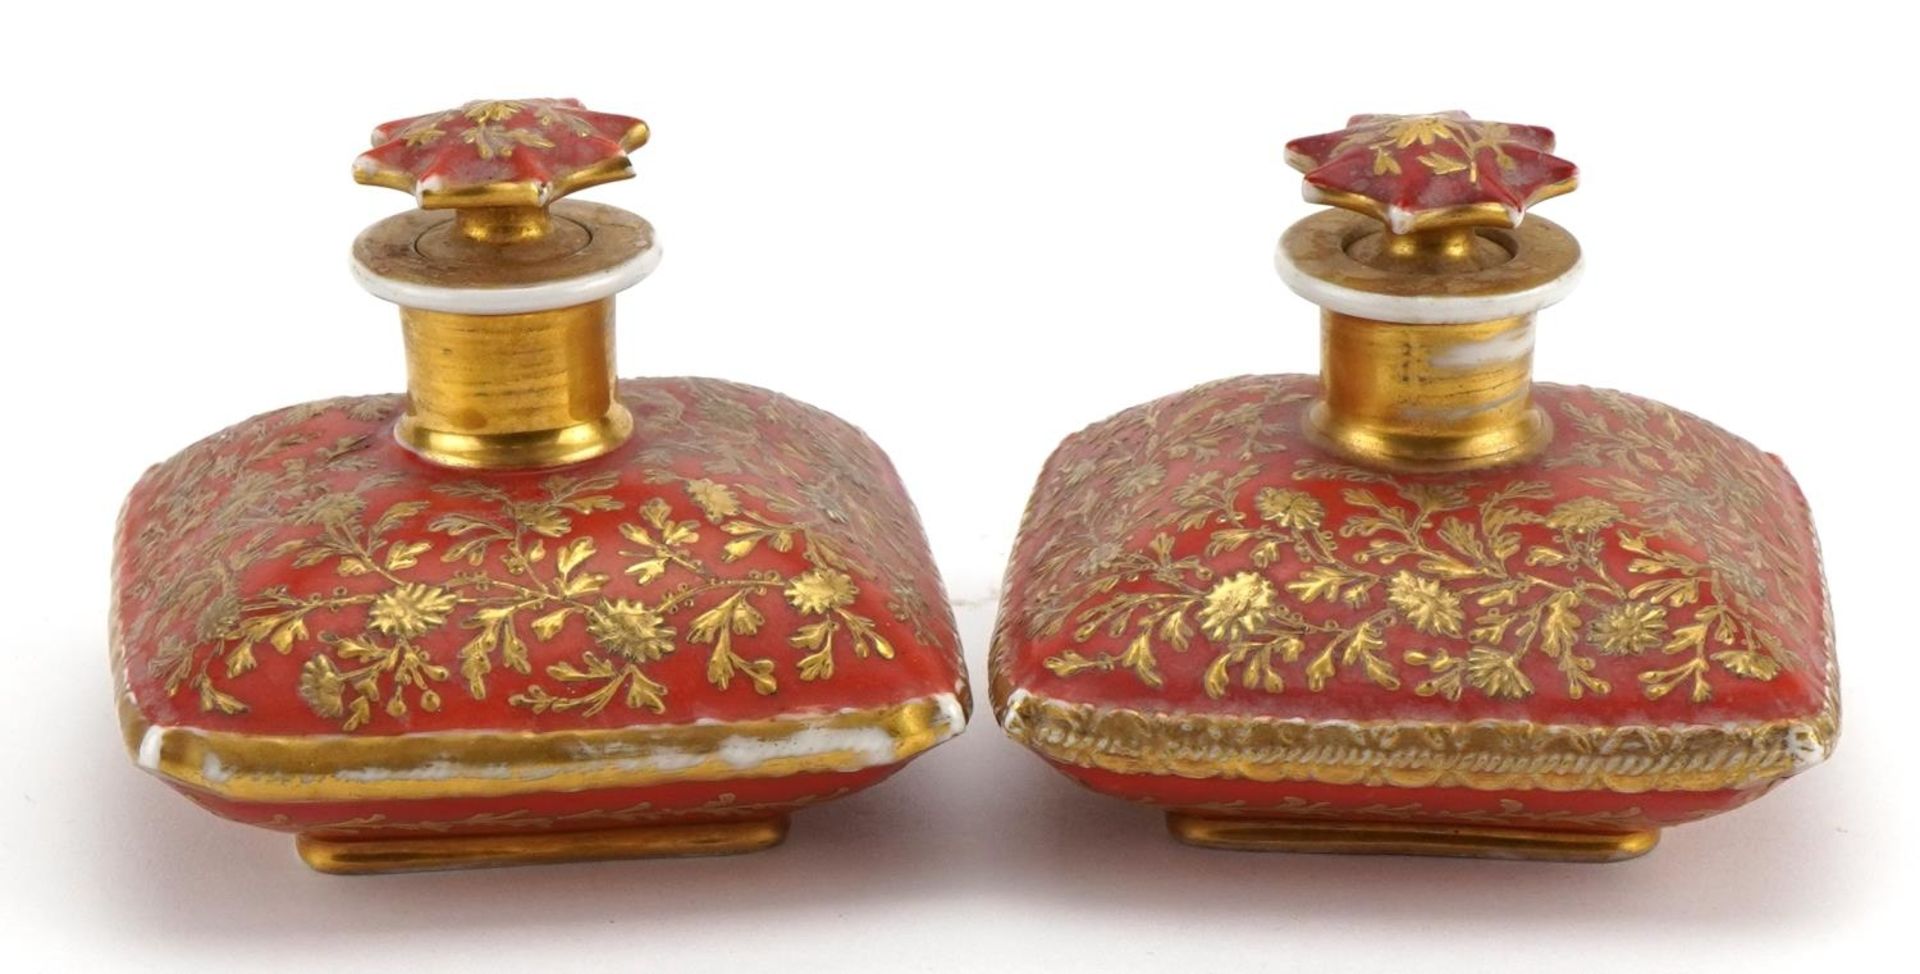 Pair of 19th century French porcelain scent bottles gilded with flowers, each 8.5cm high